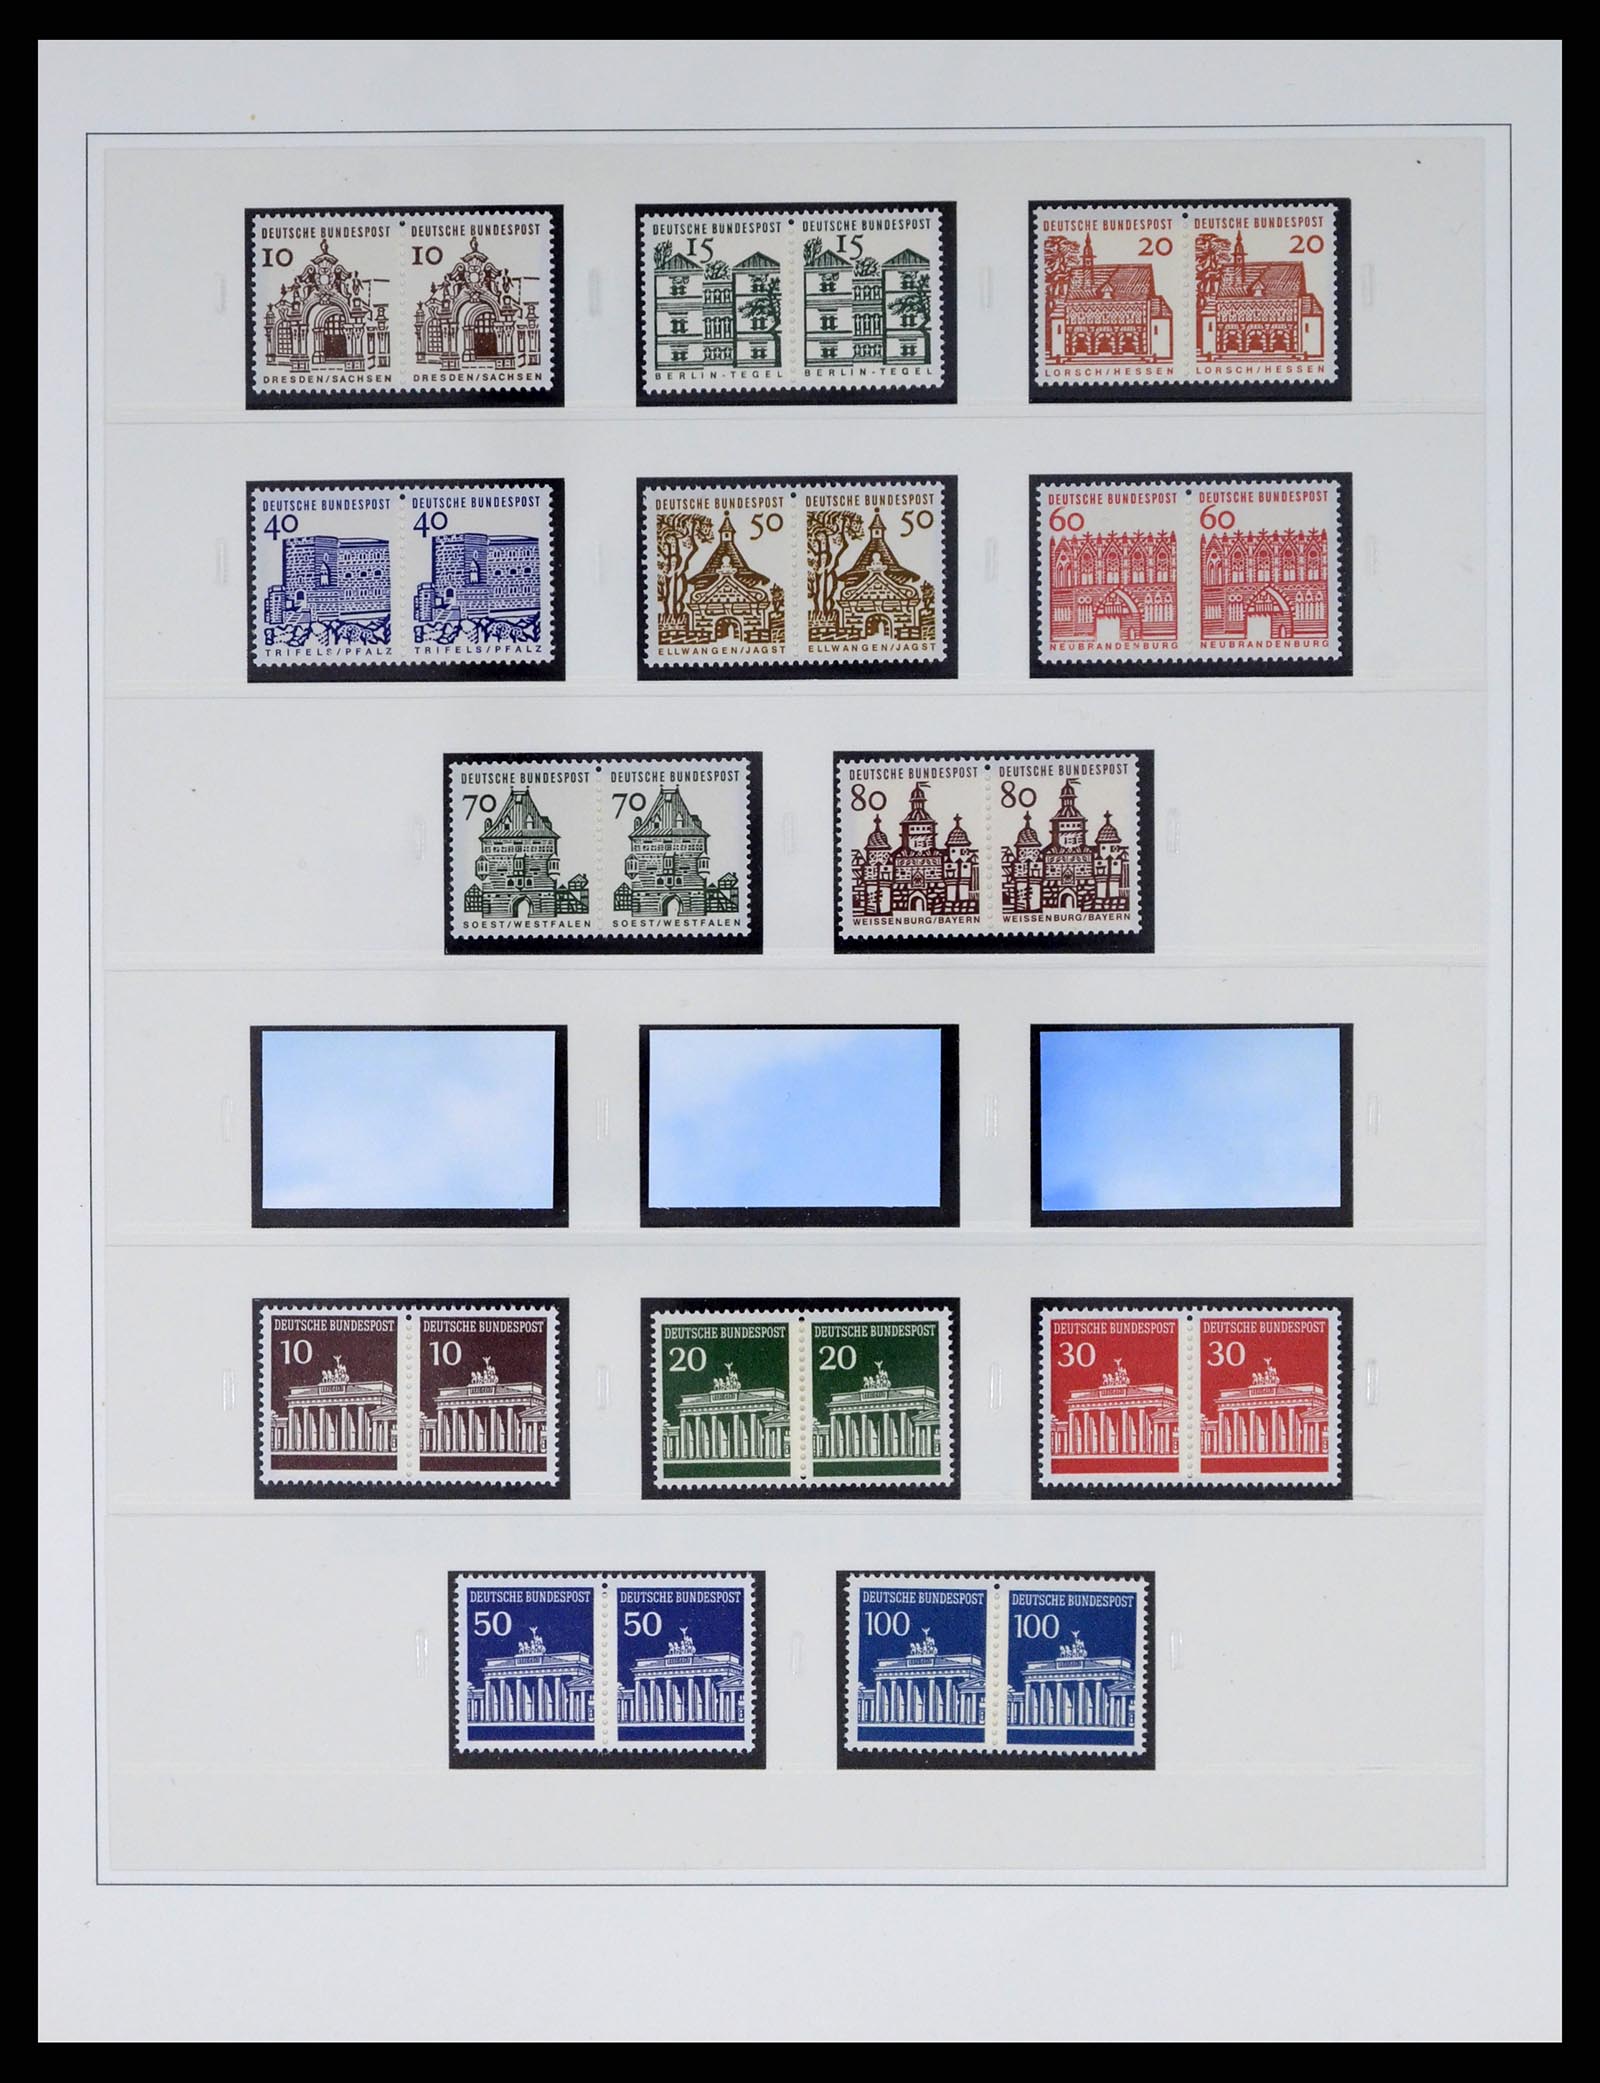 37354 006 - Stamp collection 37354 Bundespost and Berlin 1955-2000.